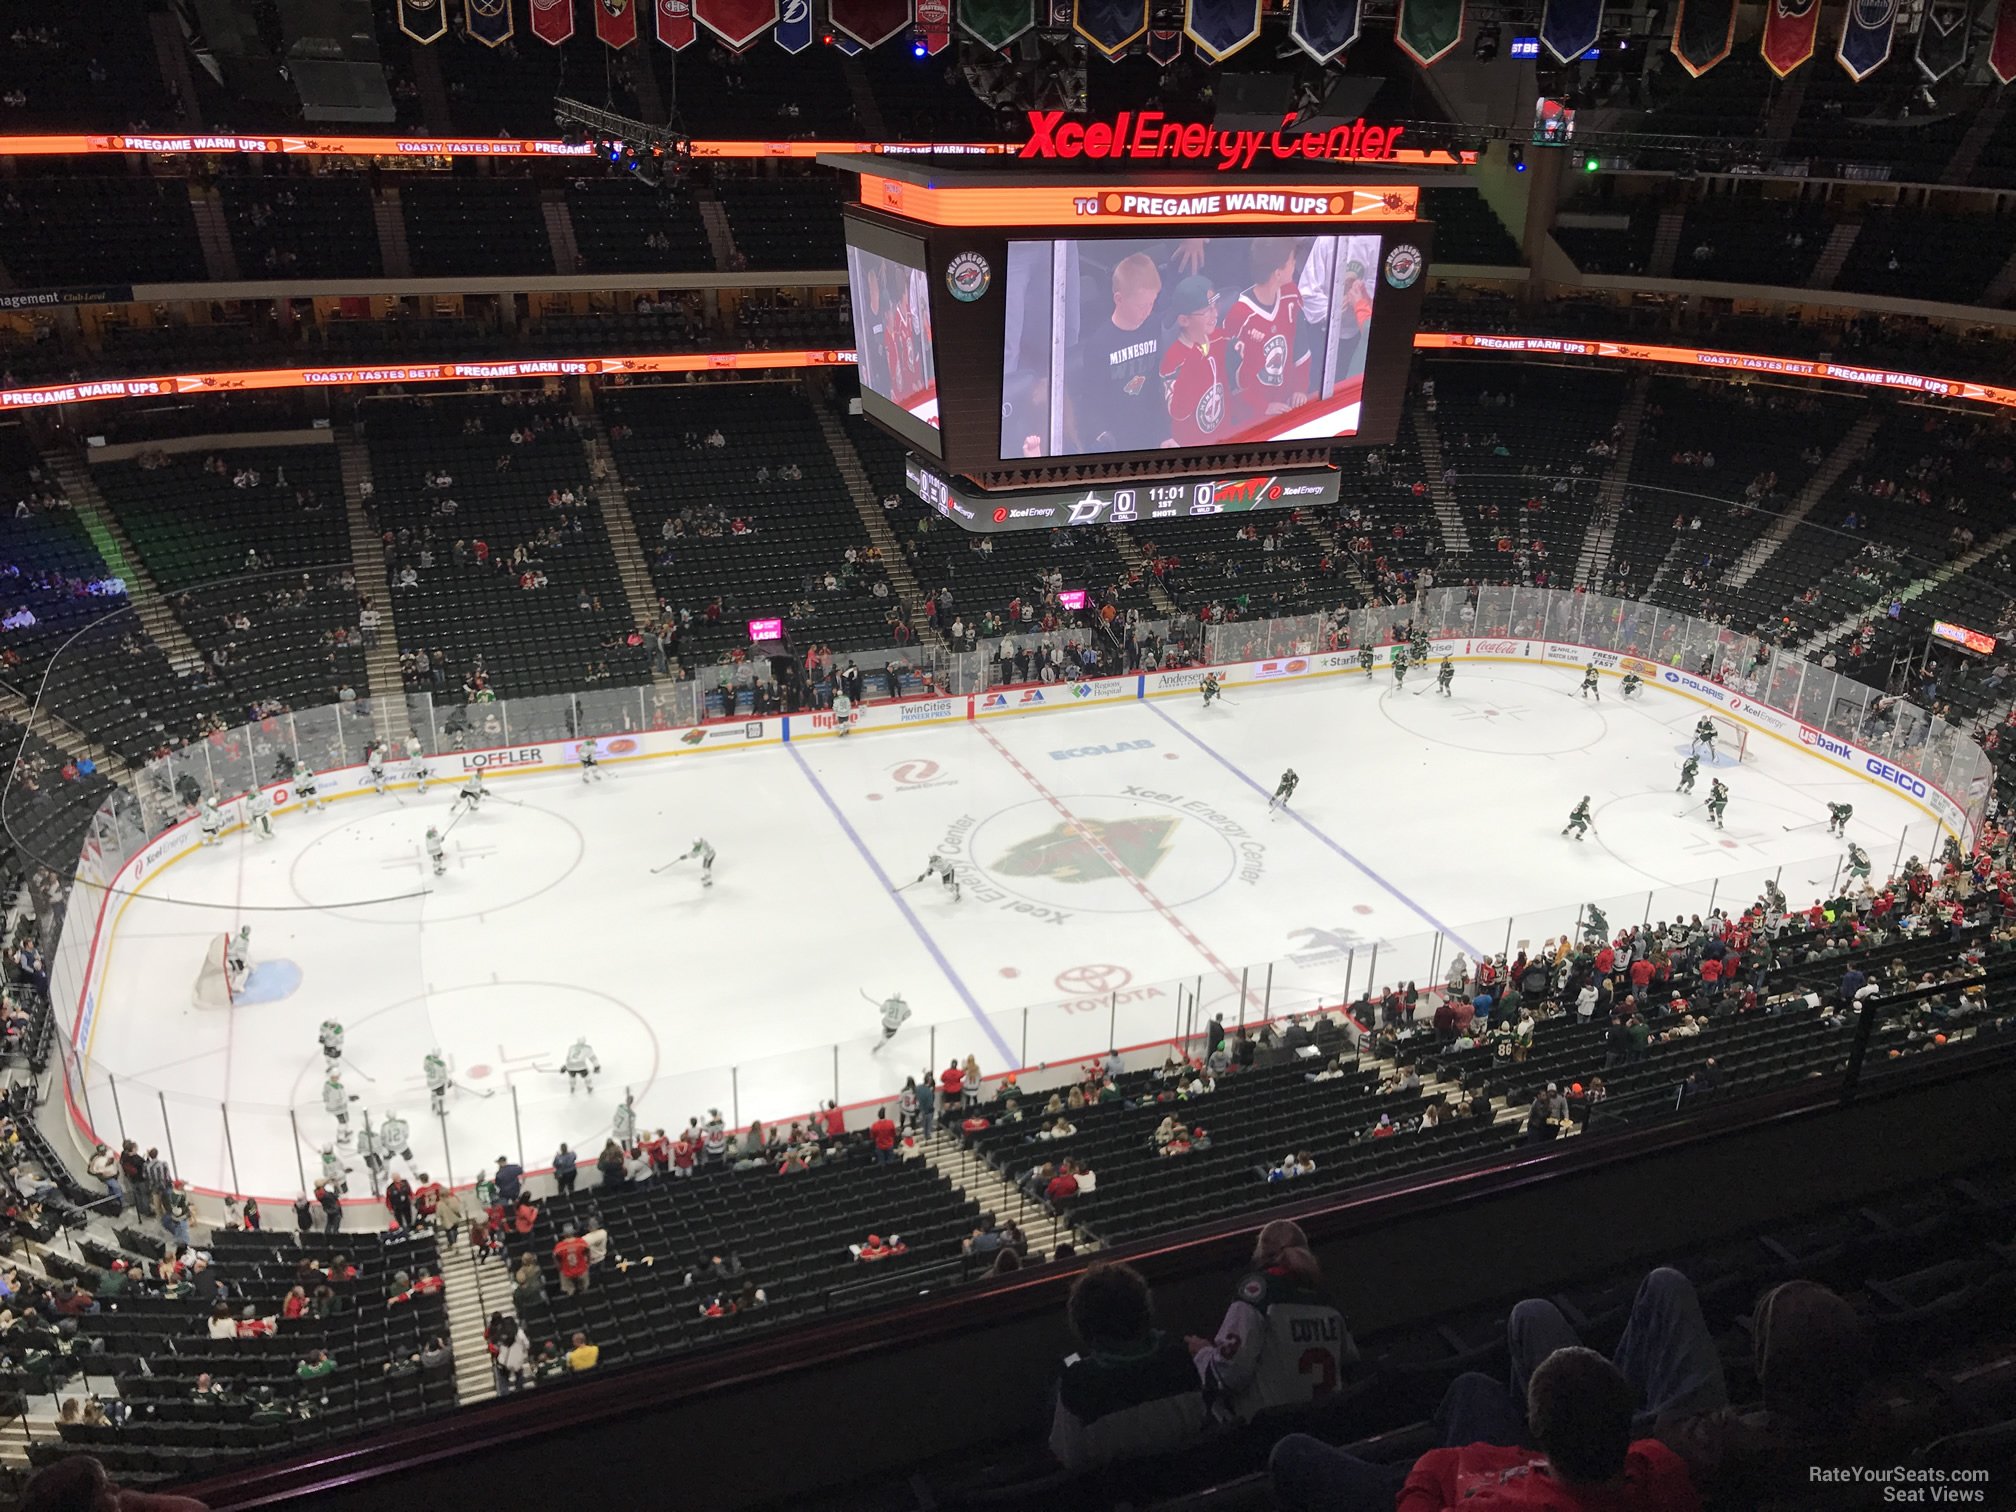 section 206, row 6 seat view  for hockey - xcel energy center